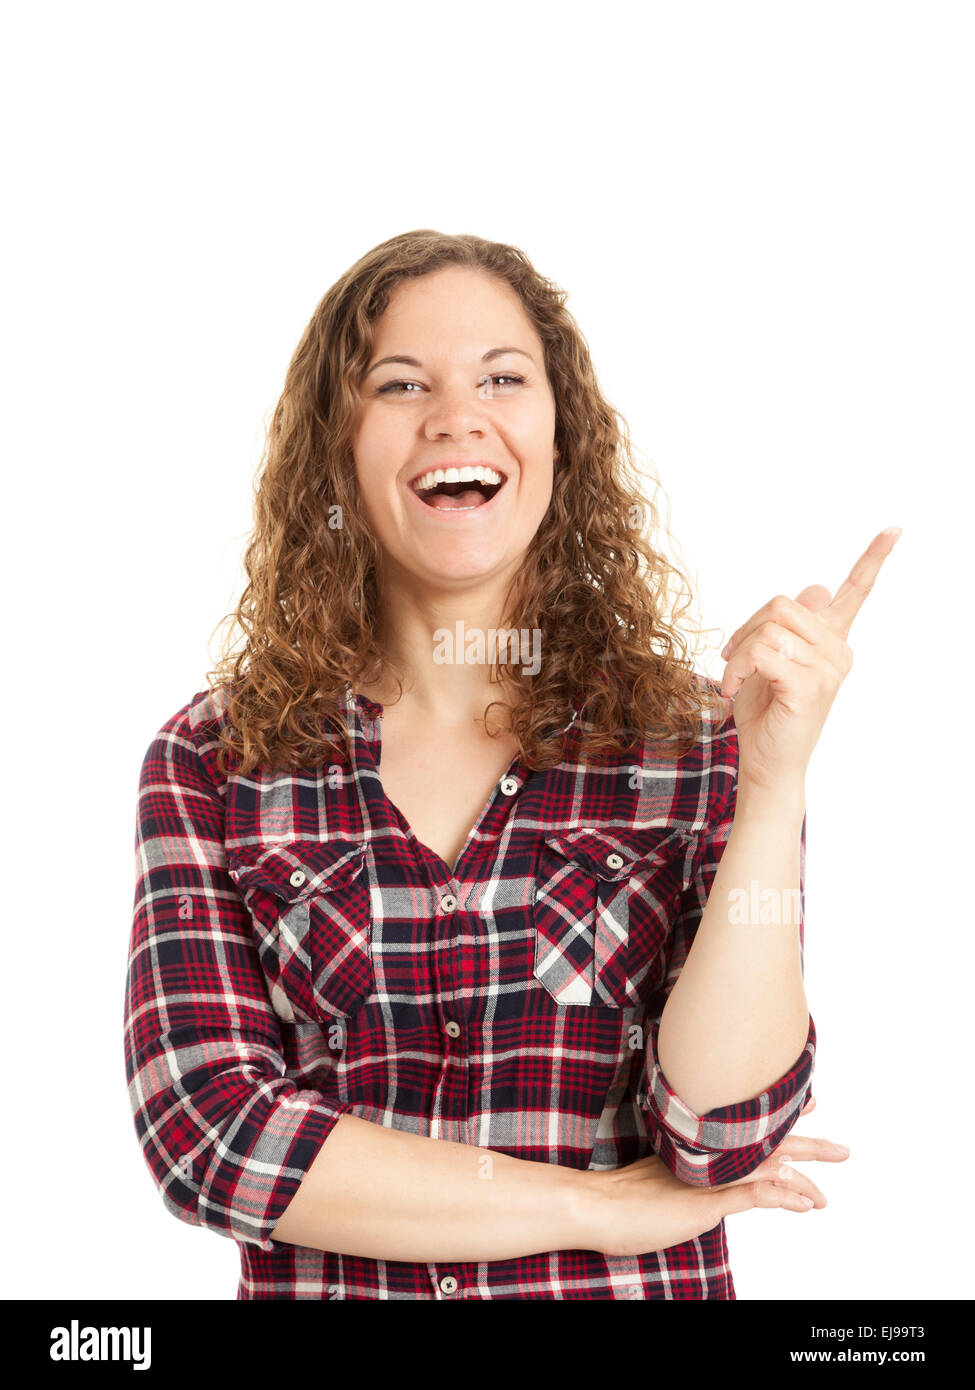 Young girl pointing an idea Stock Photo